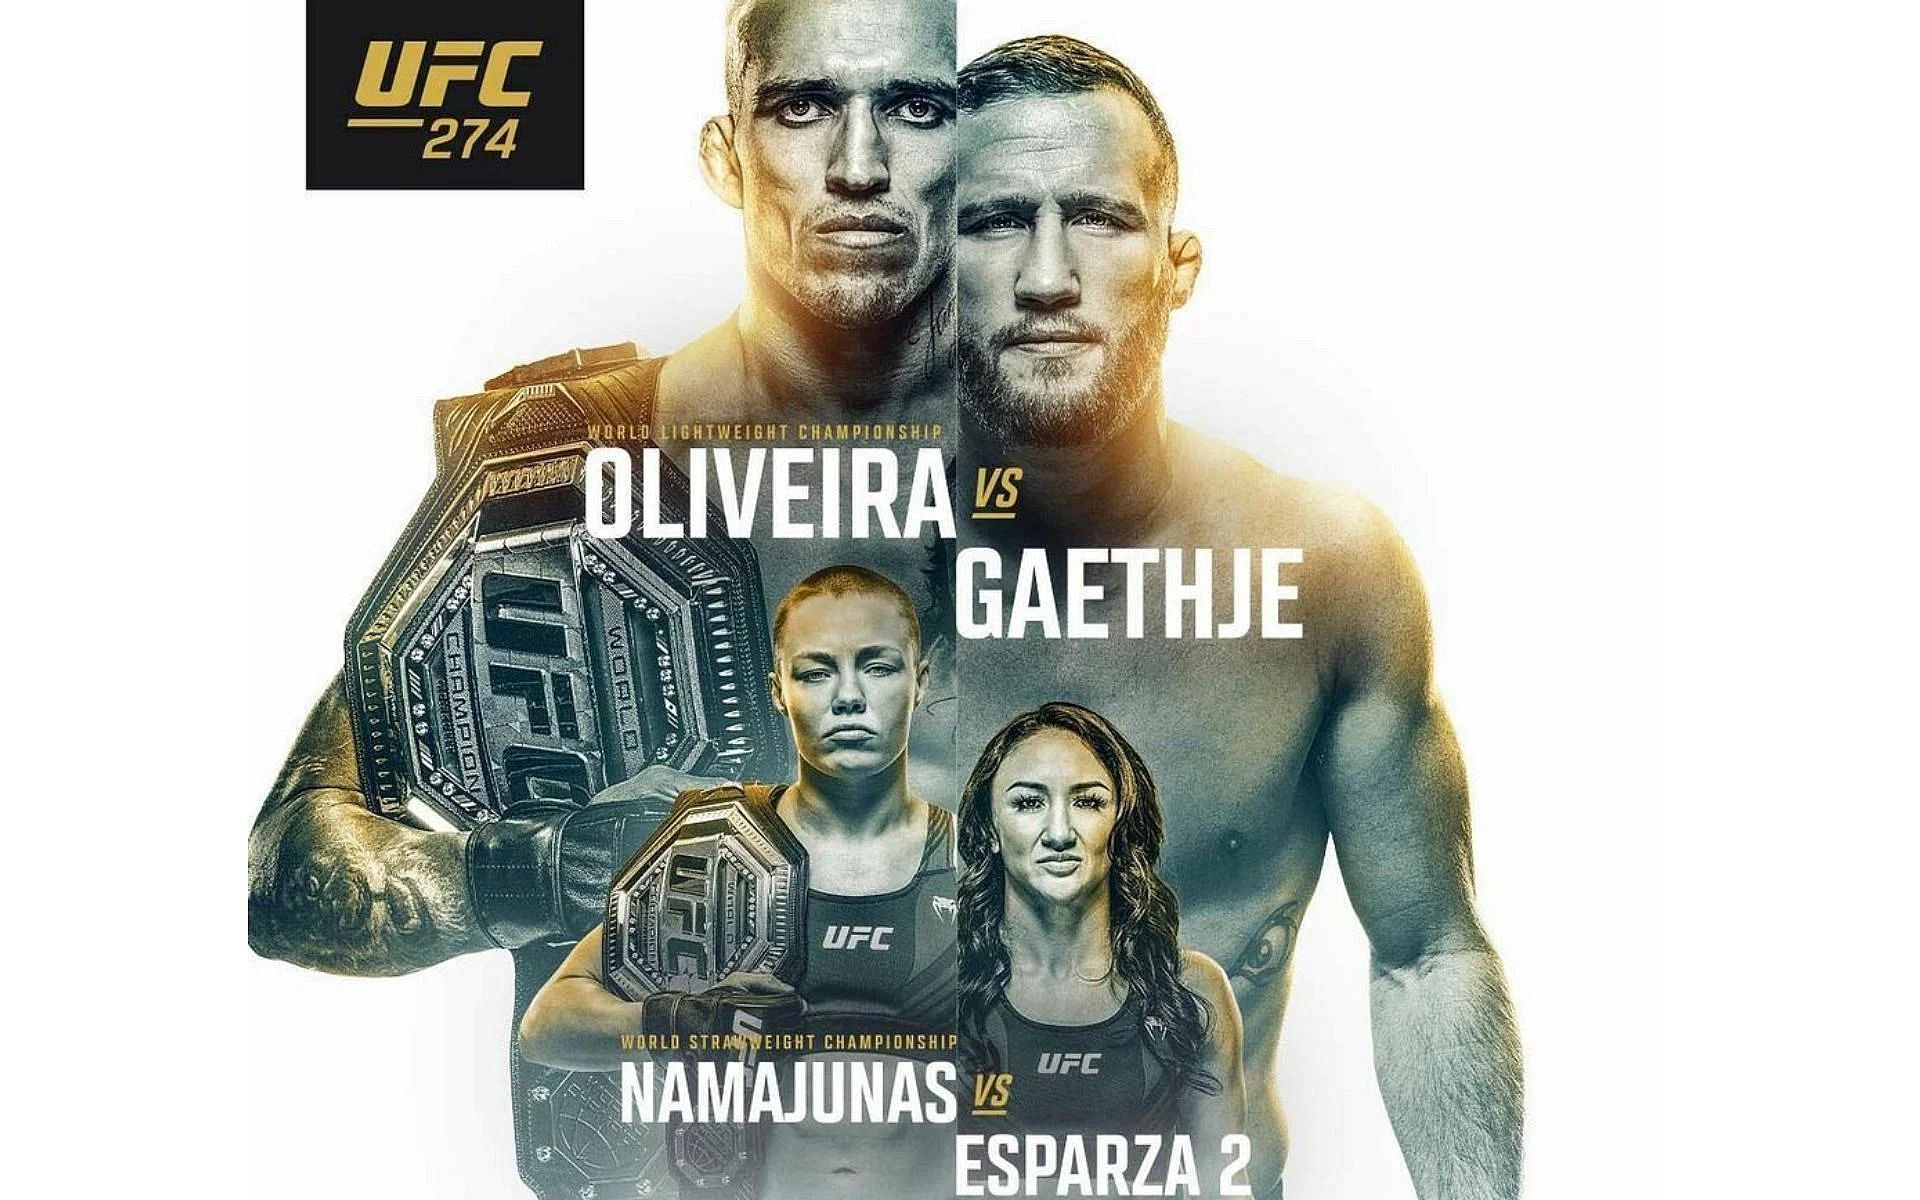 UFC 274 What channel is the UFC fight tonight (May 7, 2022)?